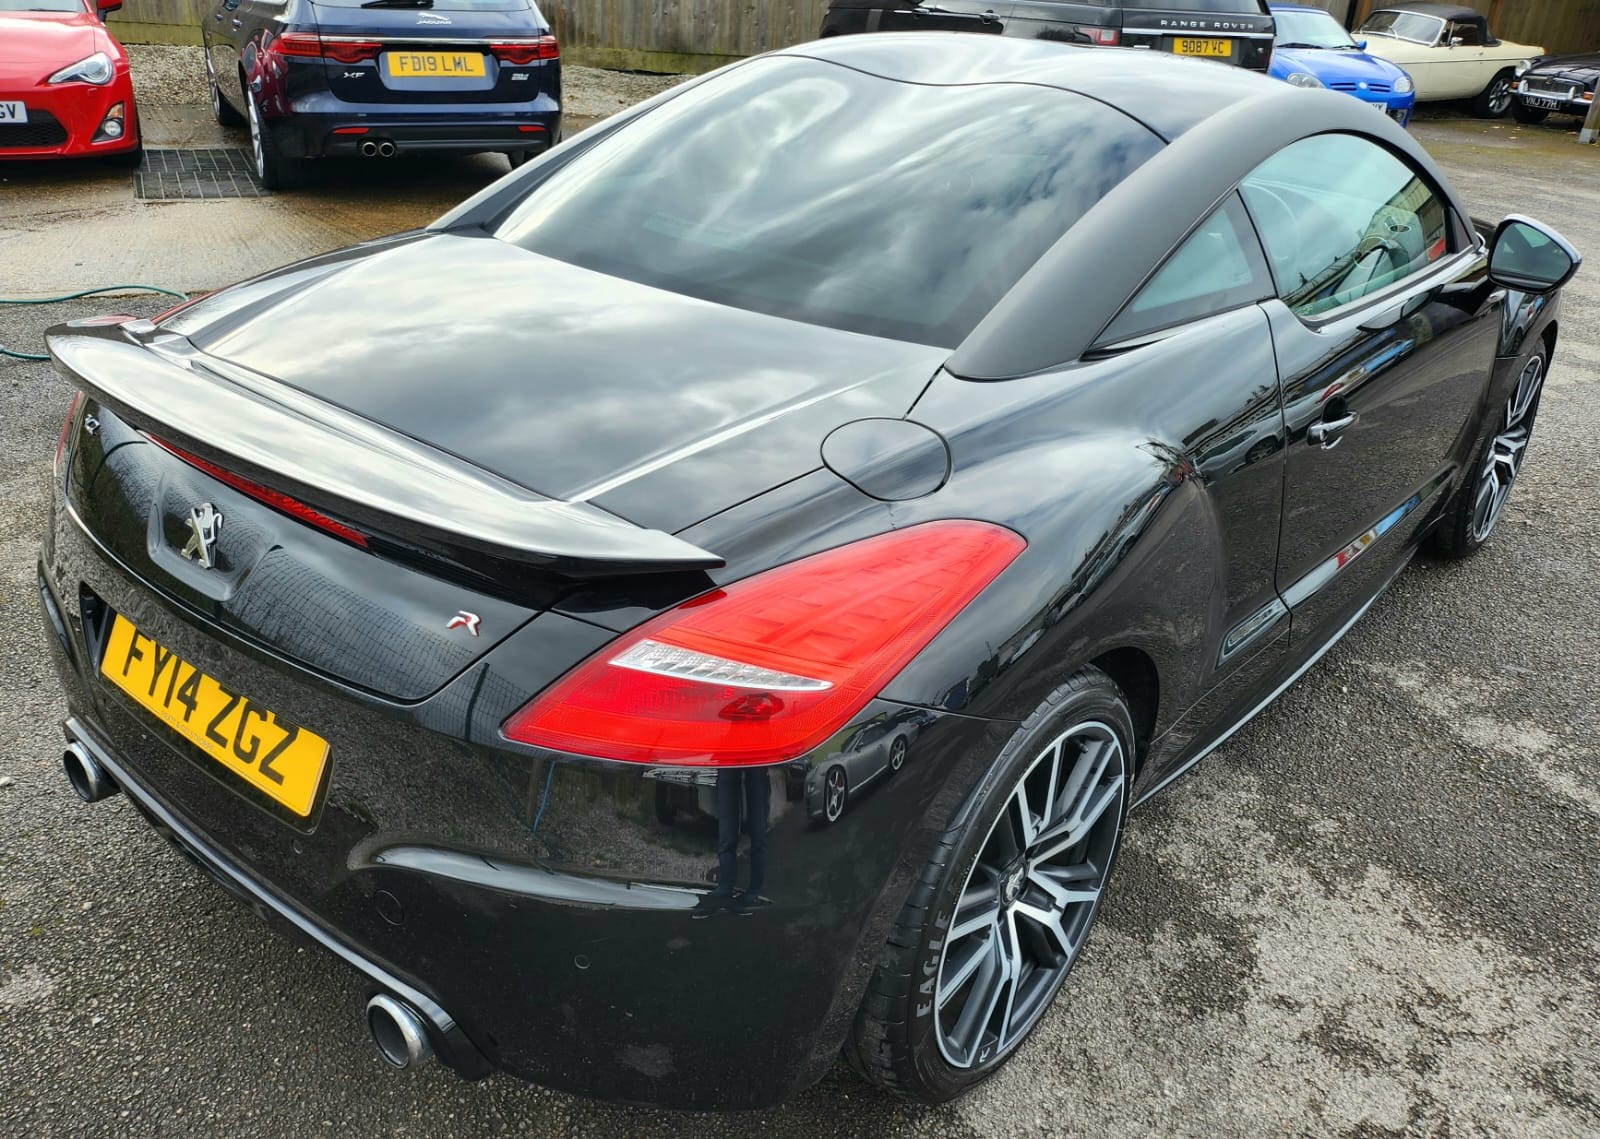 Used Peugeot RCZ for sale in St Albans, Hertfordshire